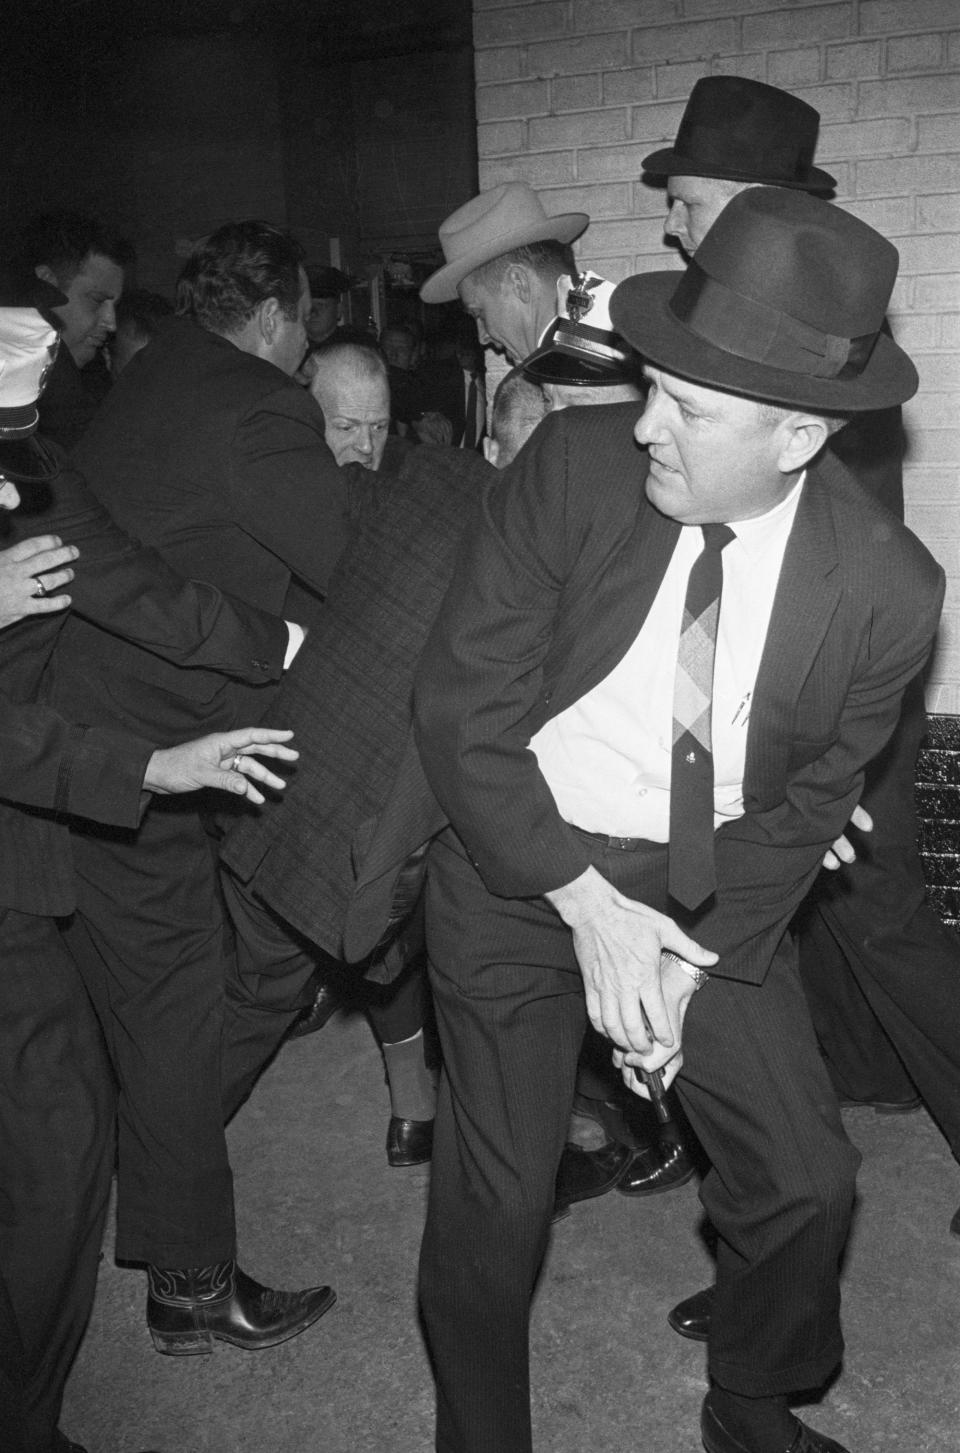 <p>Dallas police struggle with Jack Ruby, after the nightclub owner shoots the alleged assassin Lee Harvey Oswald in a corridor of Dallas police headquarters, Nov. 24, 1963. The officer in the foreground holds the gun Ruby used. (Photo: Bettmann/Getty Images) </p>